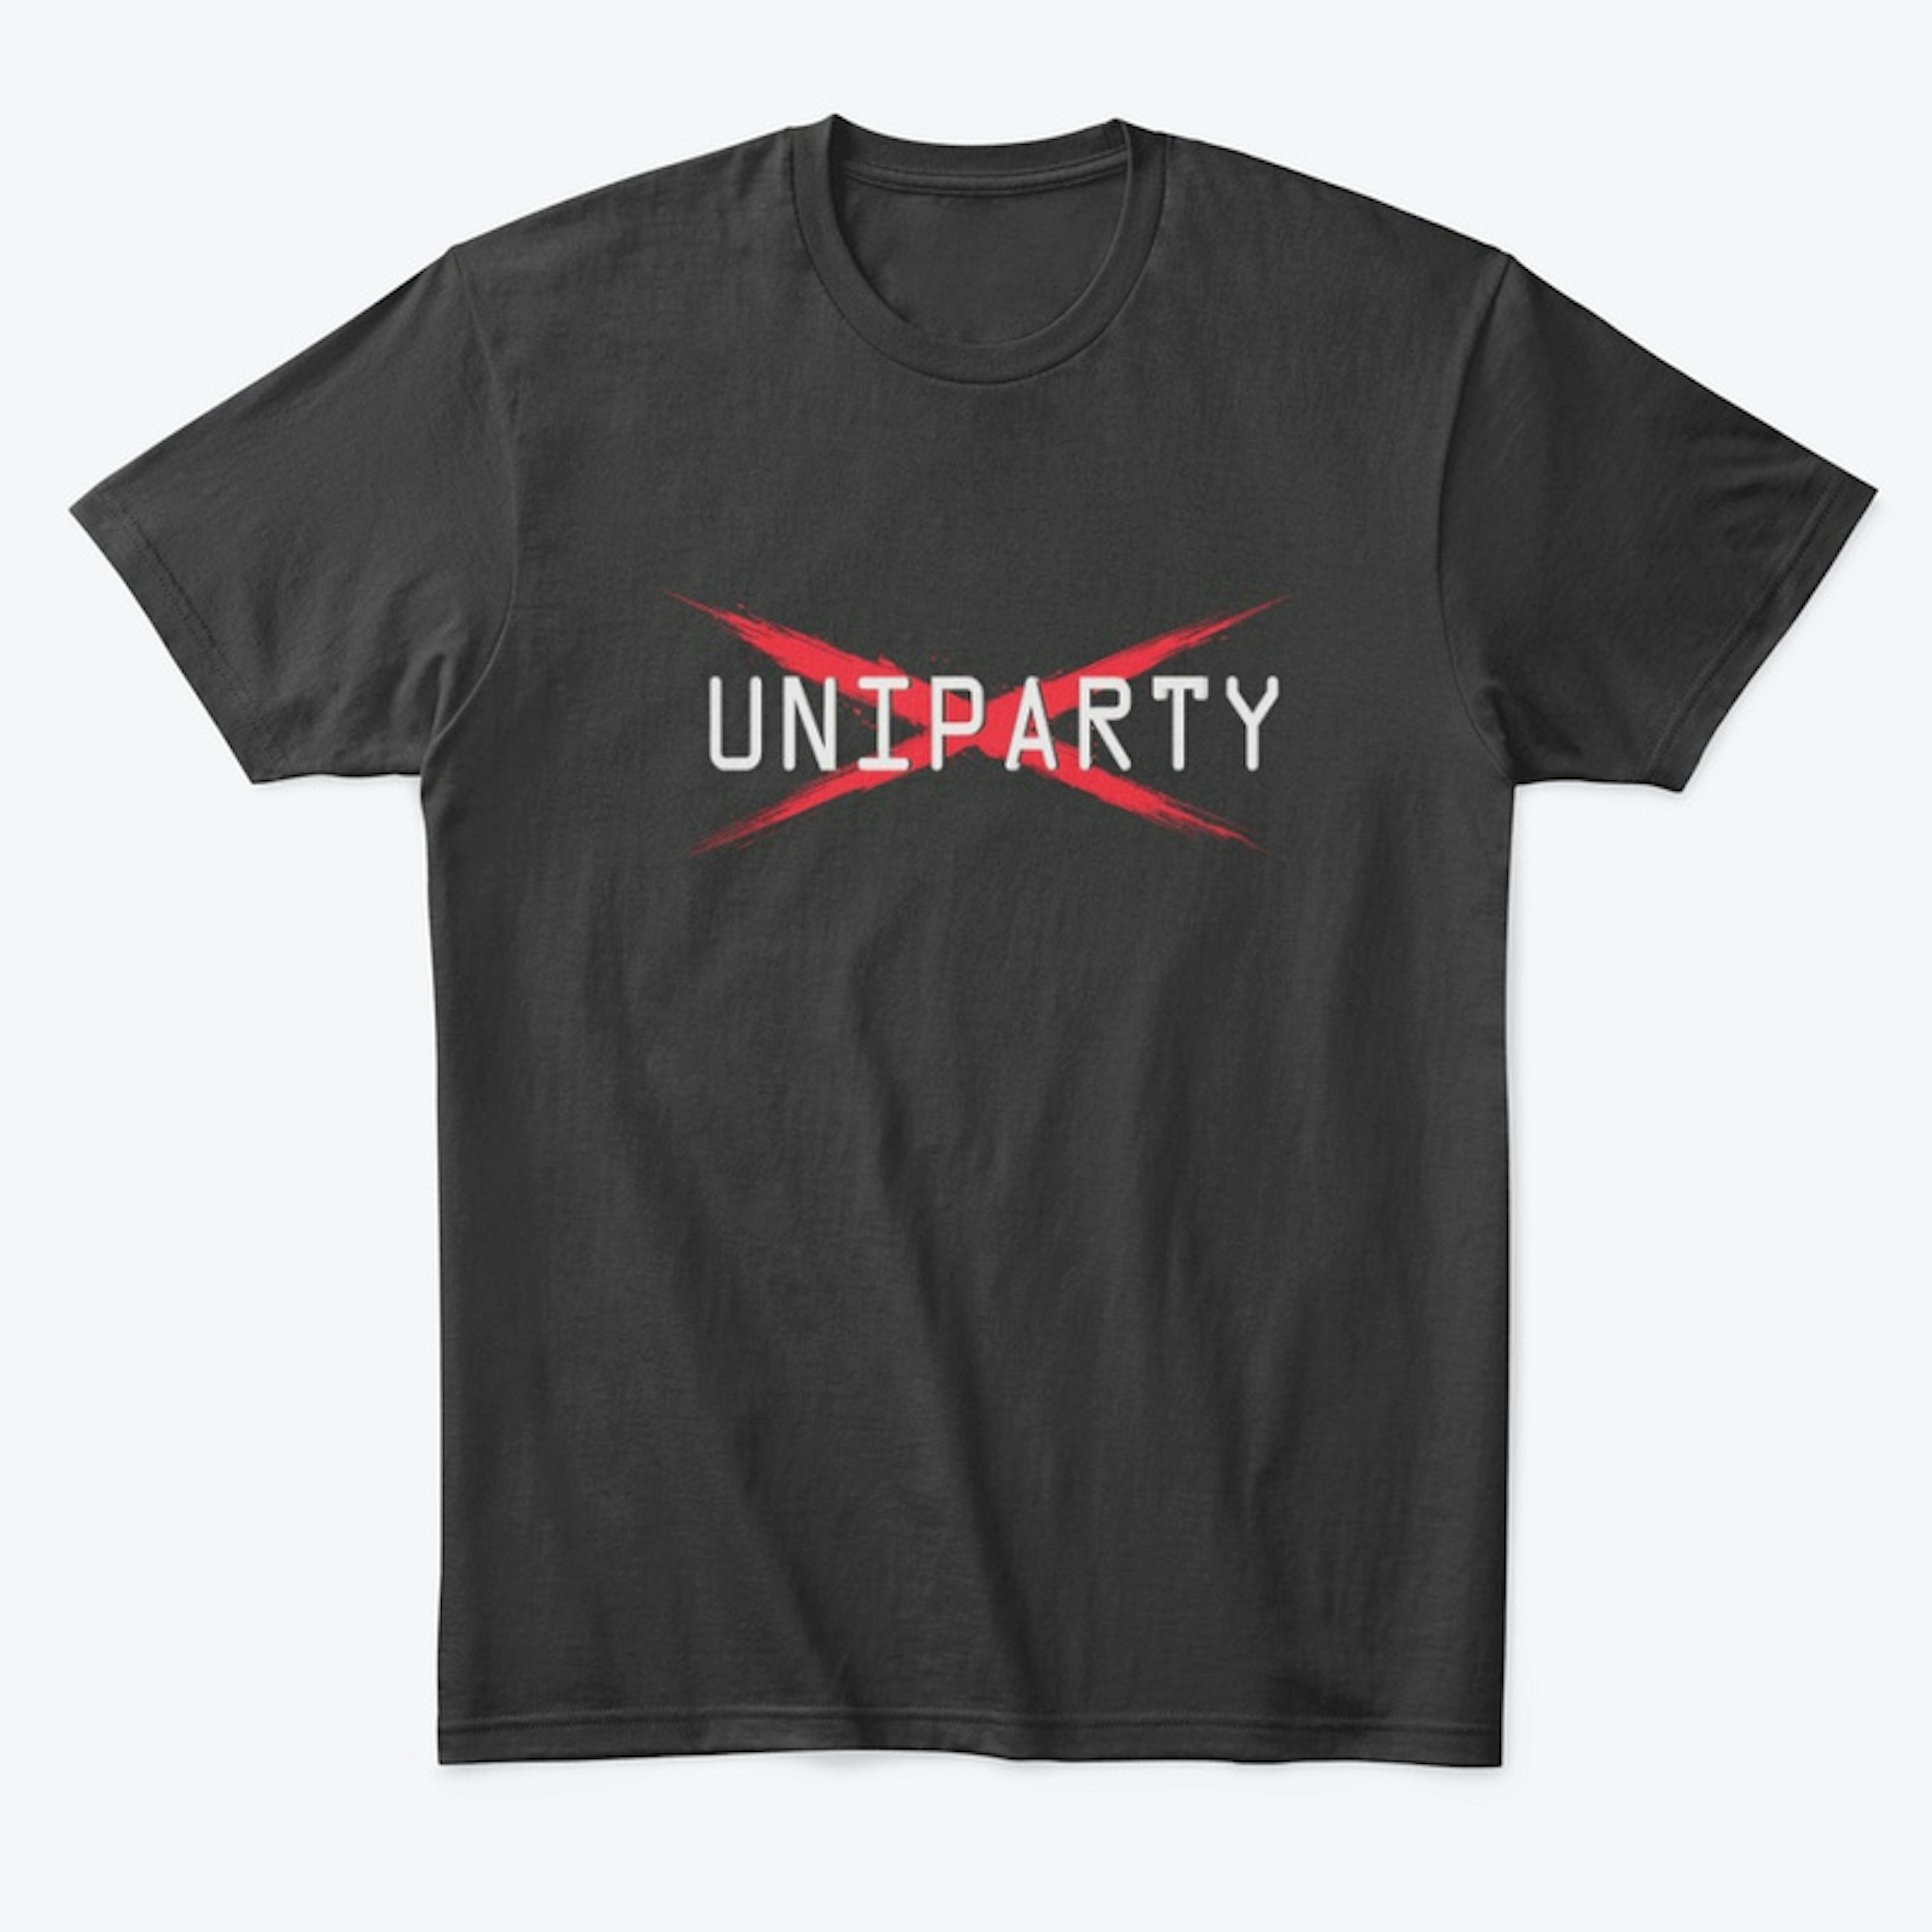 Uniparty